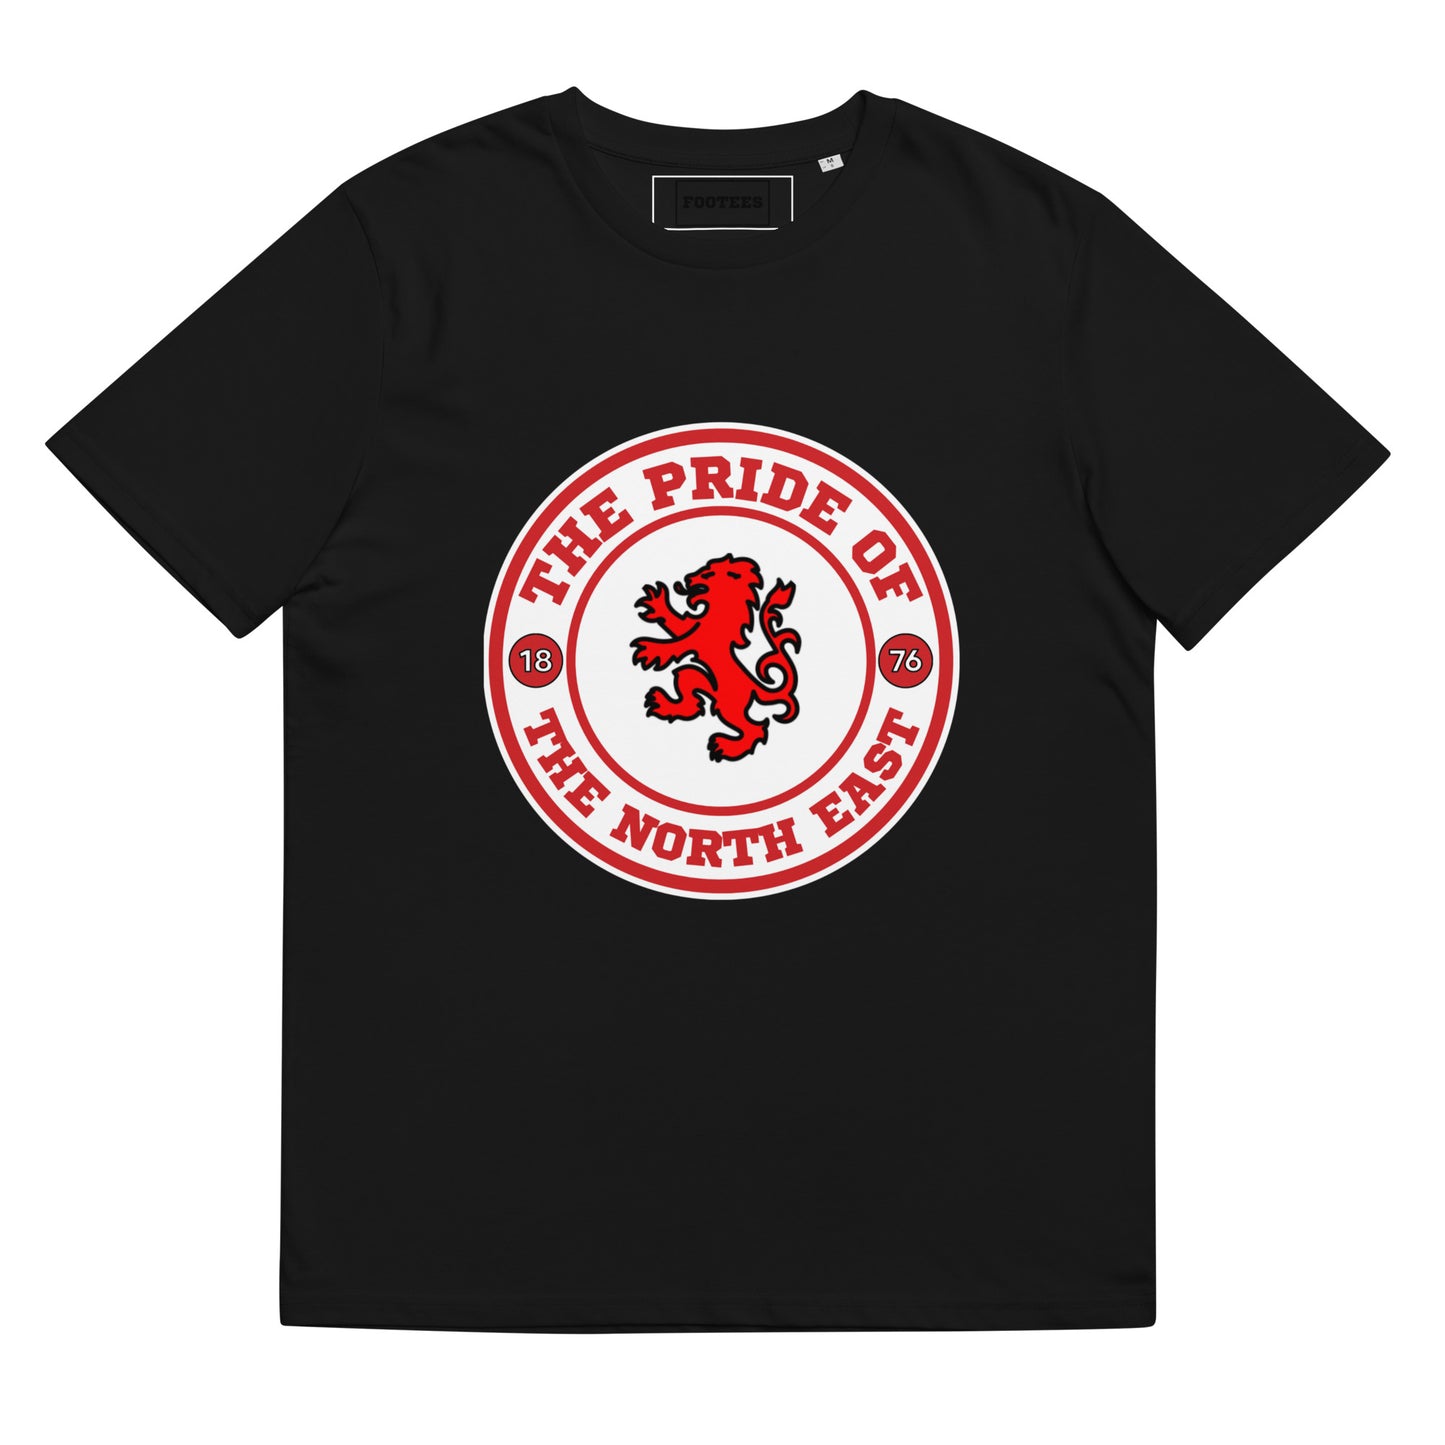 The Pride of the North East Boro Tee